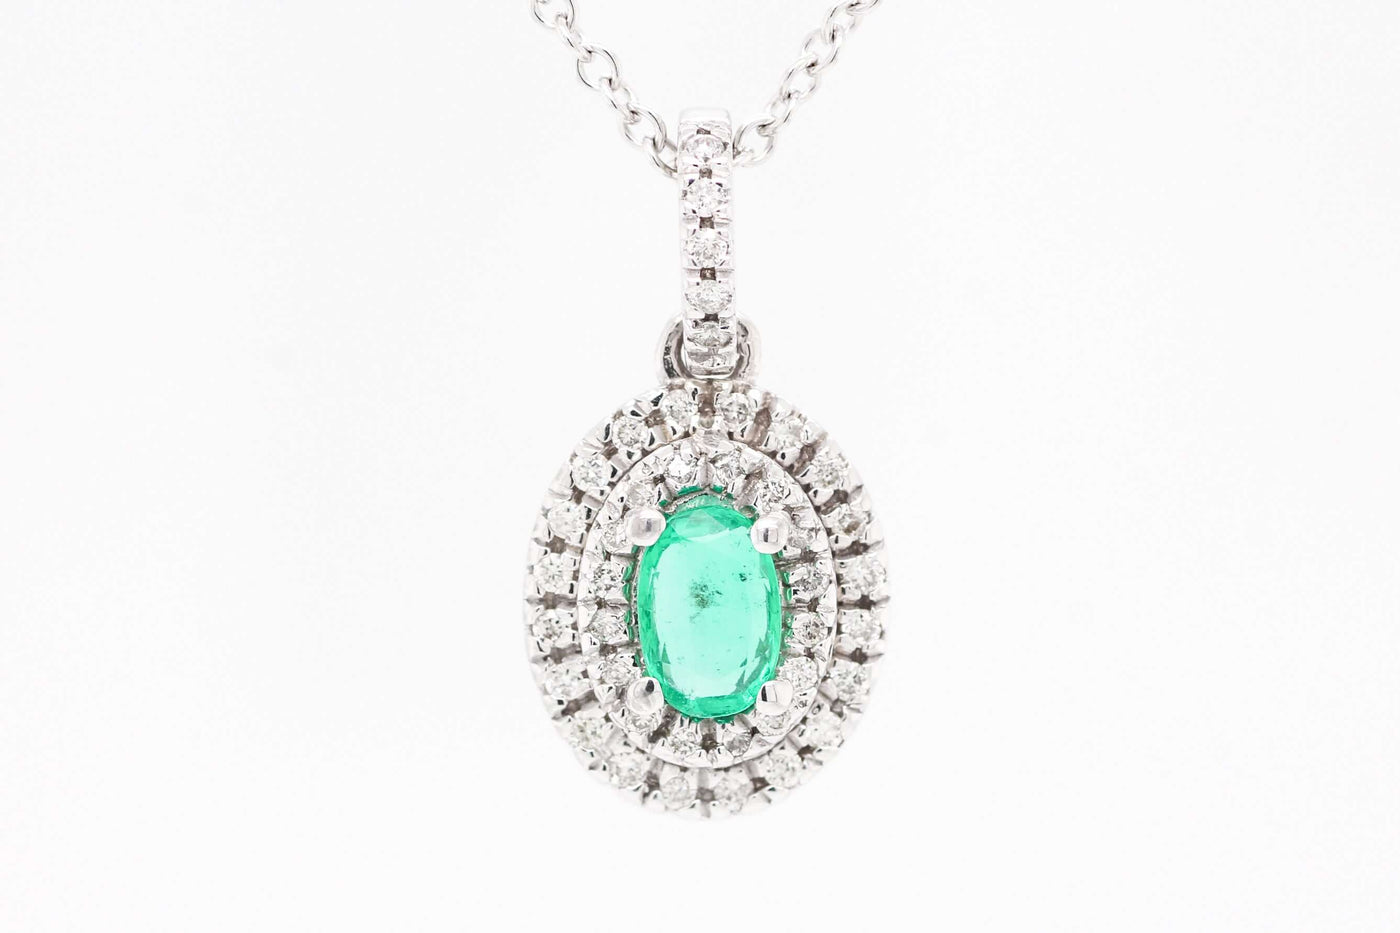 14KW .41 CT EMERALD AND DIAMOND PENDANT, .20 CTTW, H-SI2